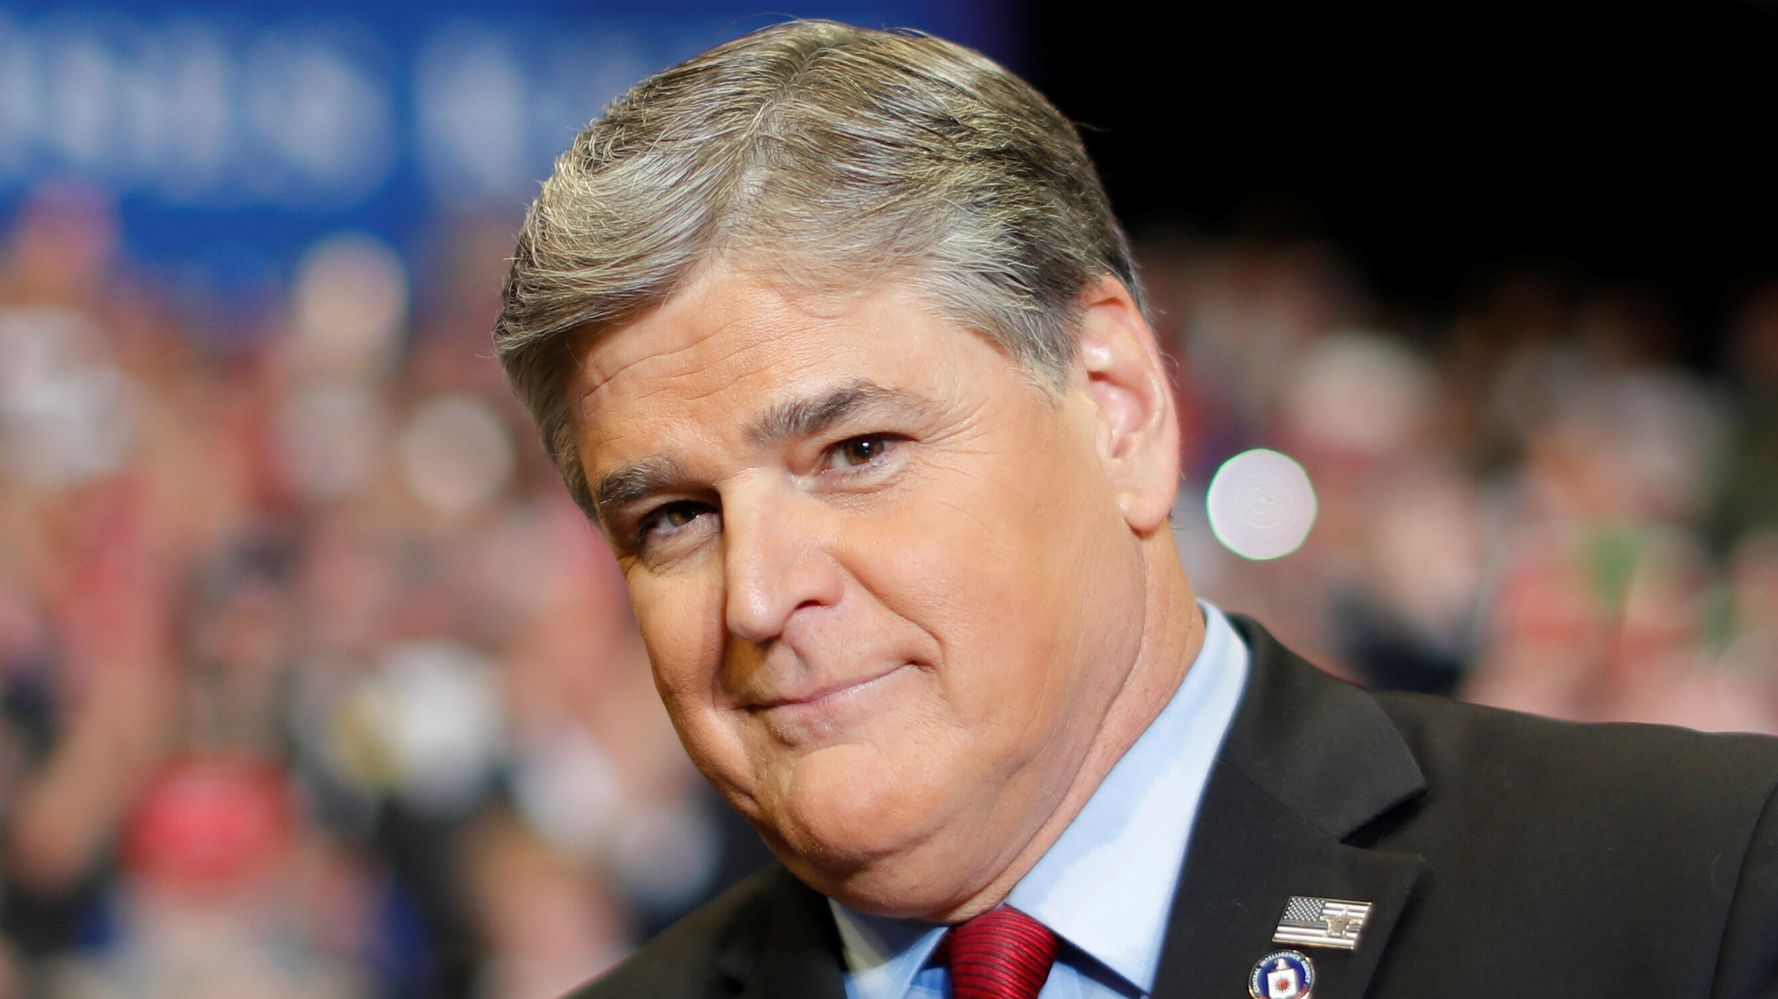 Sean Hannity’s Clueless Question About Biden Gets Turned Right Back At Donald Trump